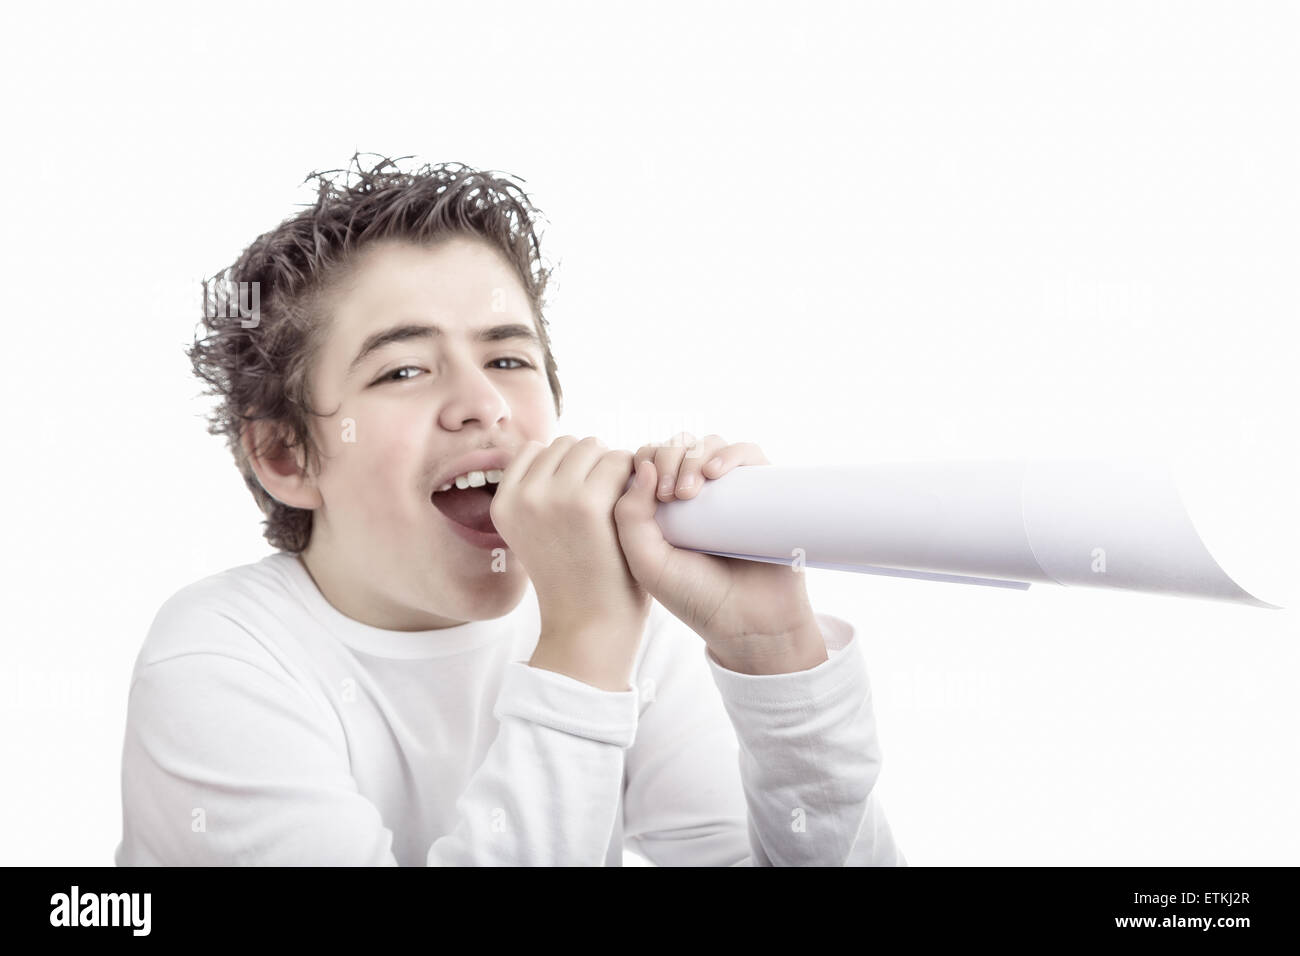 Handsome smiling  hispanic boy with medium length hair and questioning eyes shouts in a fake megaphone made with white paper Stock Photo